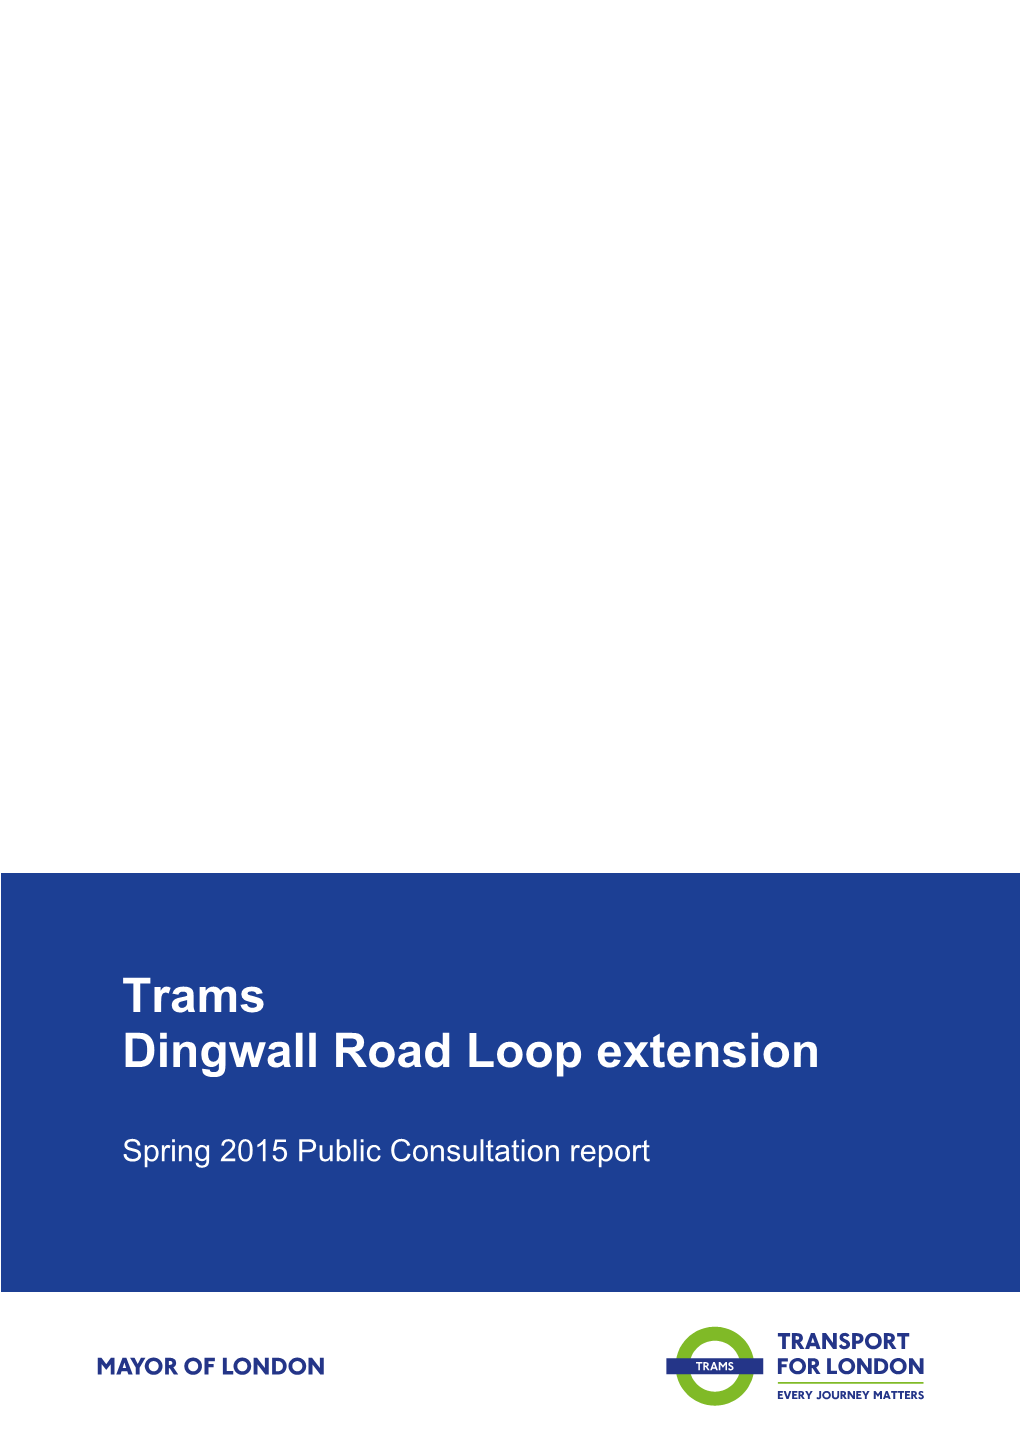 The Dingwall Road Loop Spring 2015 Consultation